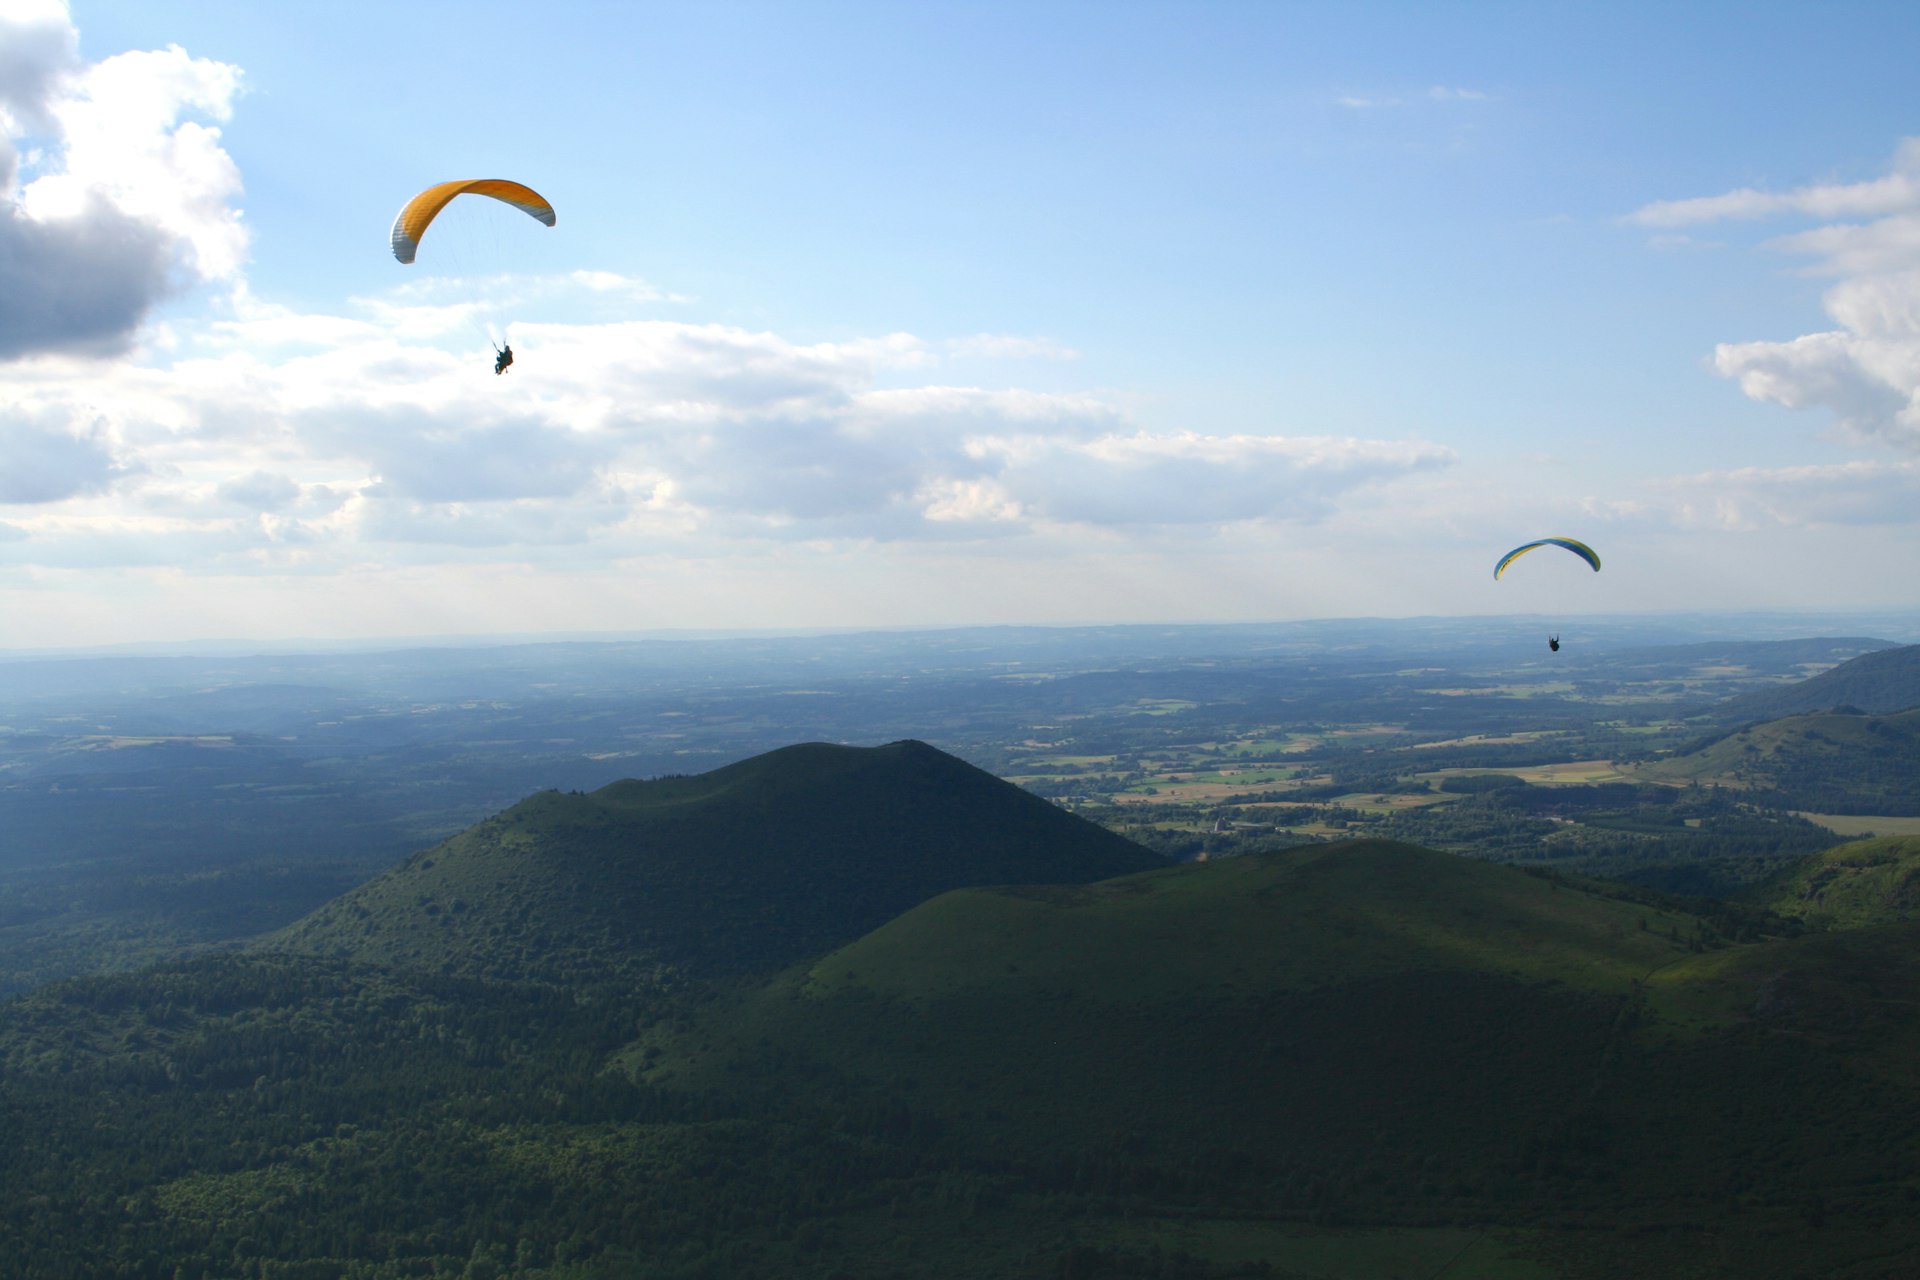 Paragliding in the thermals around the Puy de Dome, France